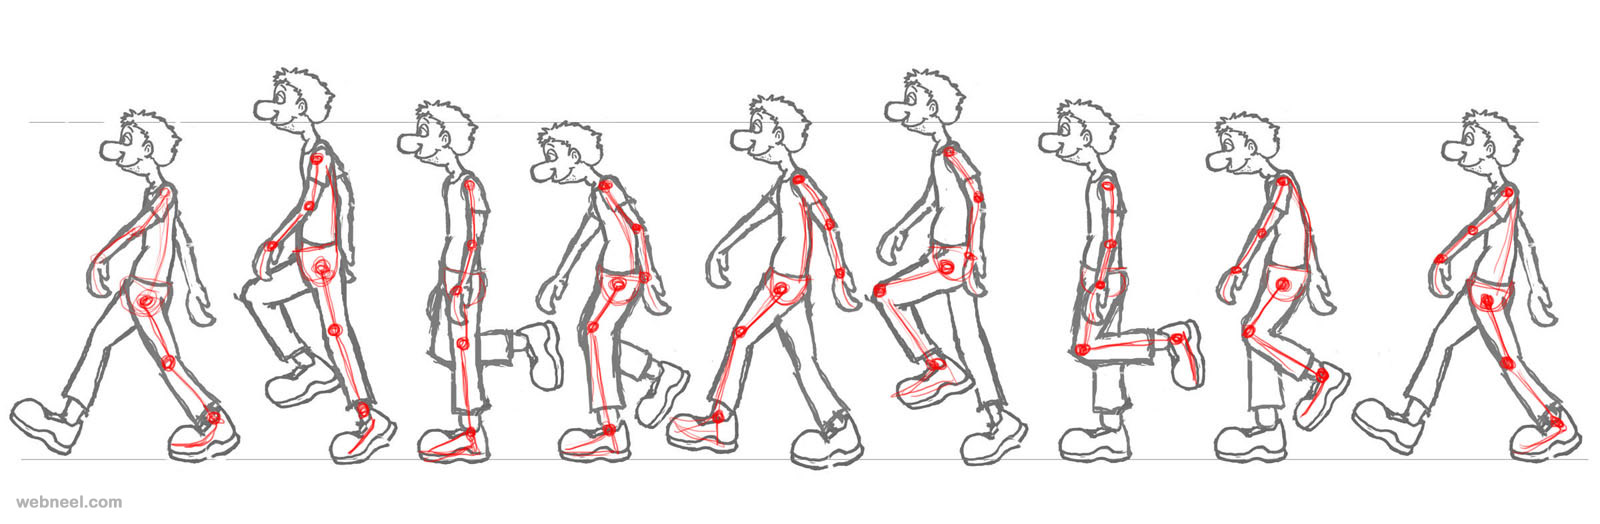 25 Best Walk Cycle Animation Videos and keyframe illustrations